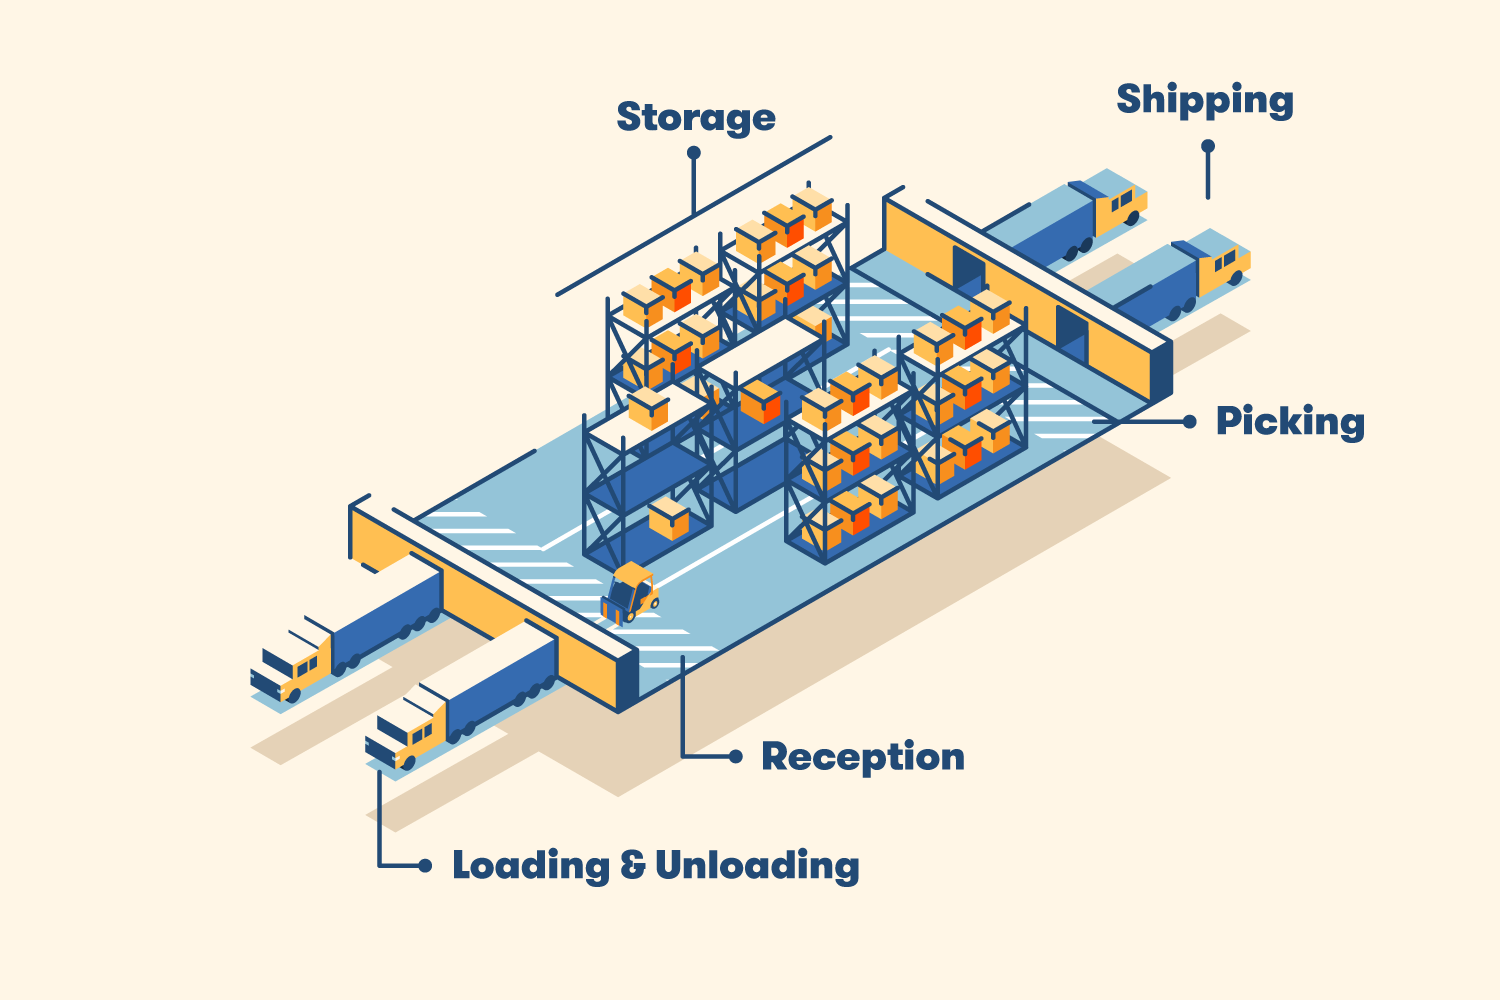 Graphical representation of an I-shaped storeroom layout.